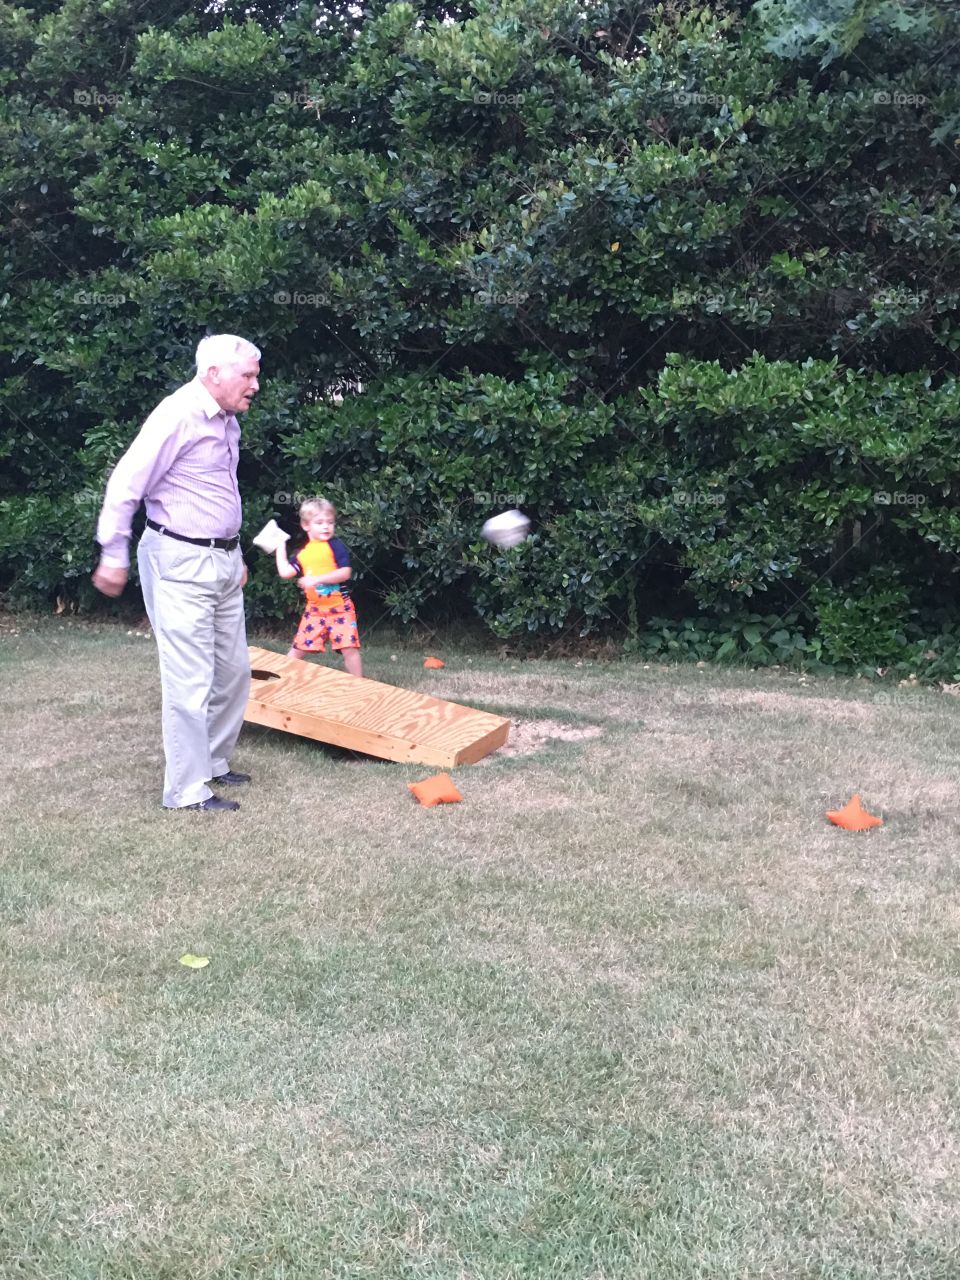 Boy playing in garden with his grandfather